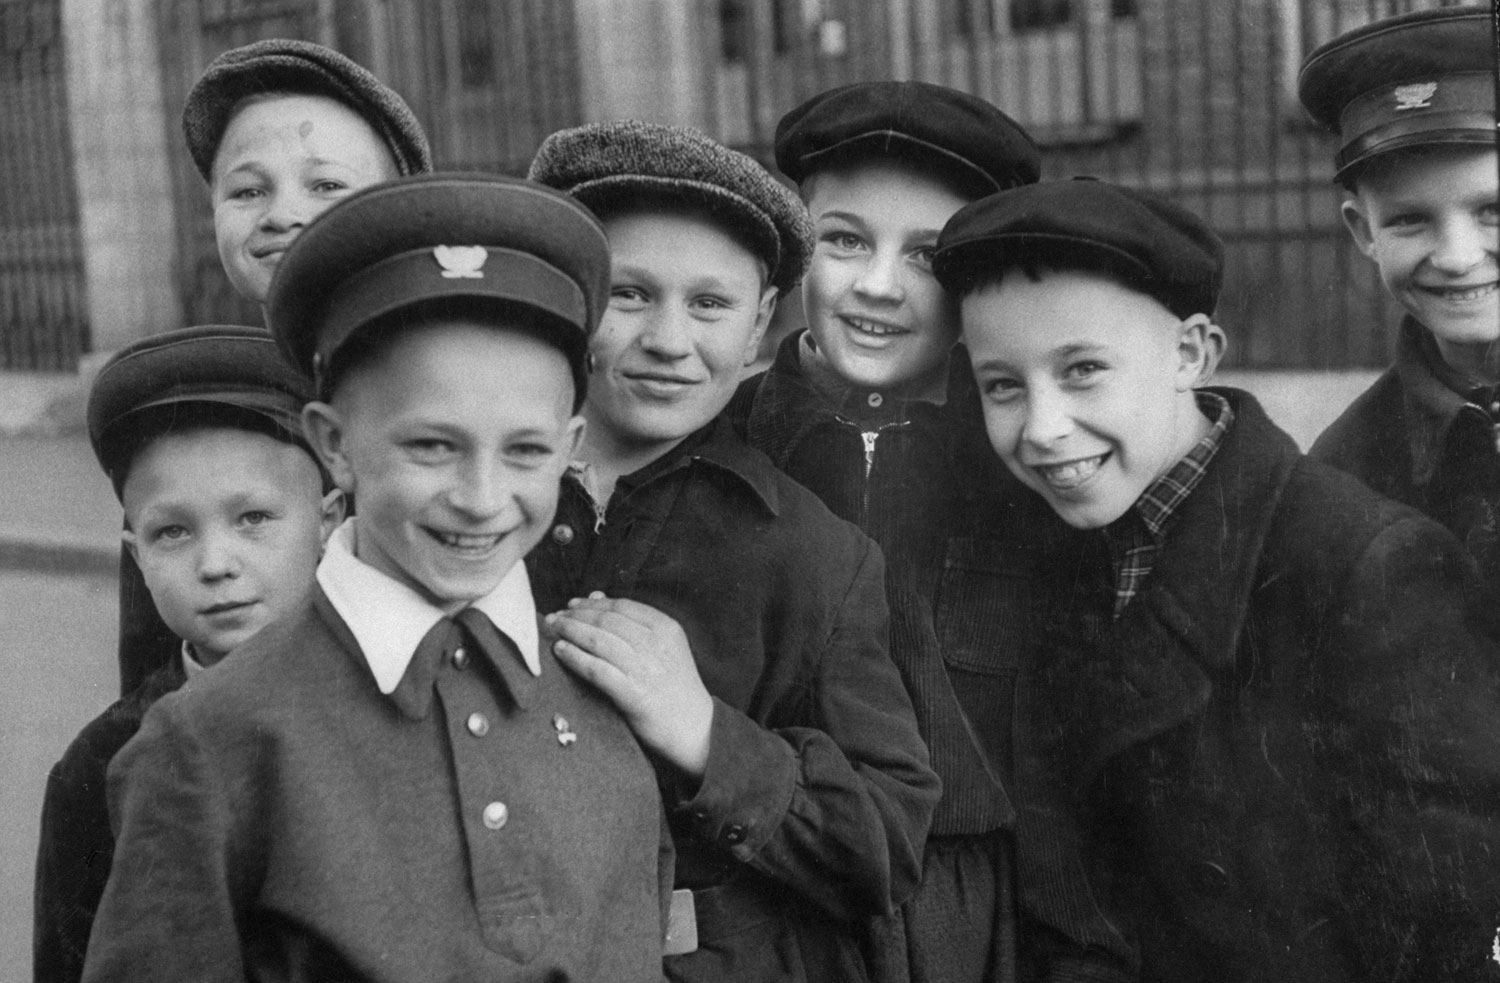 Russian boys line up to see visiting French Prime Minister Guy Mollet, 1956.